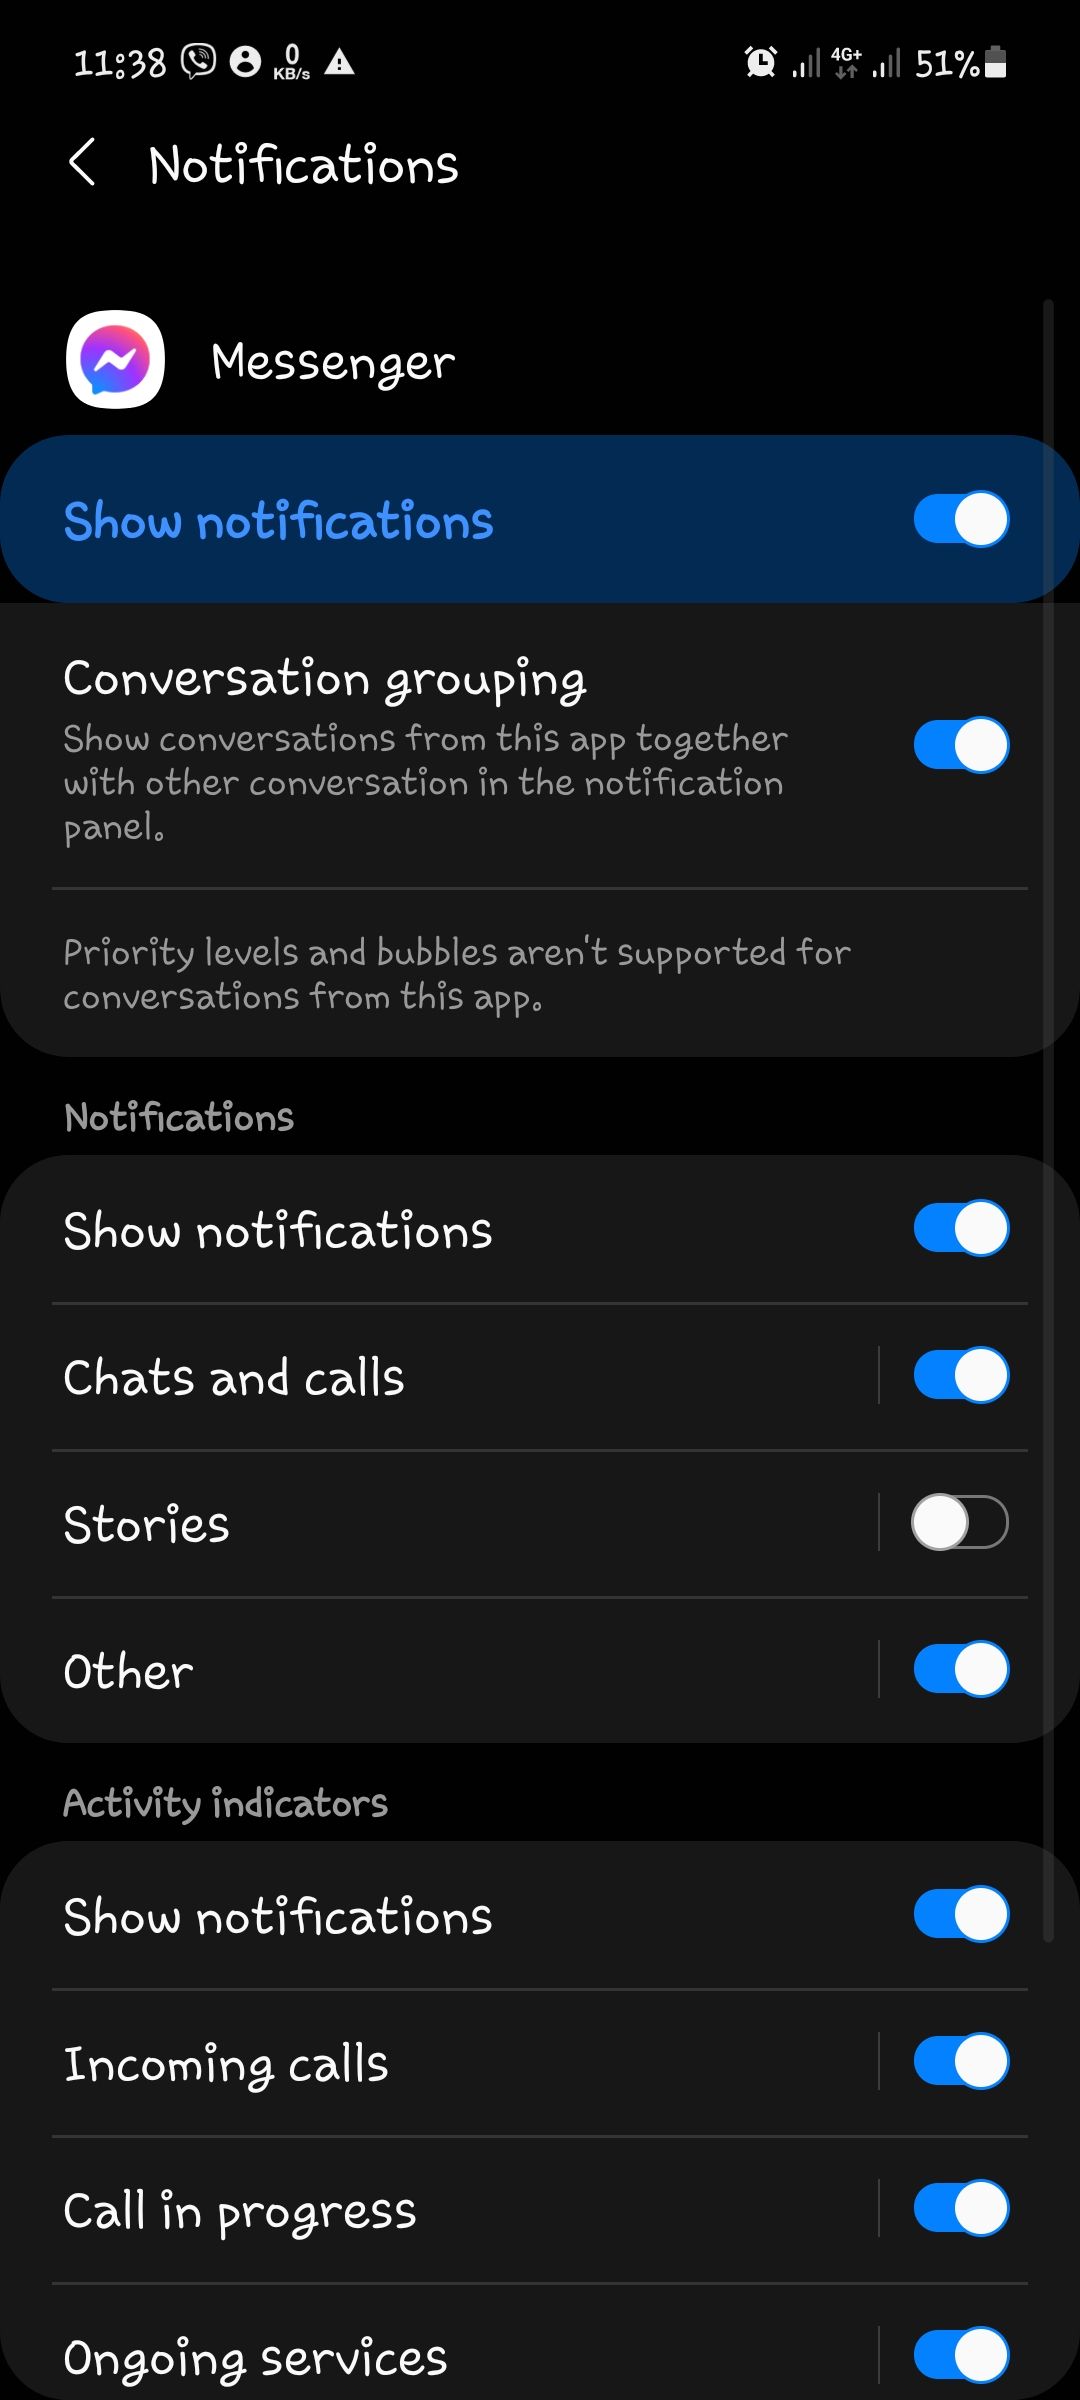 Facebook chat box too big cant see friends activity